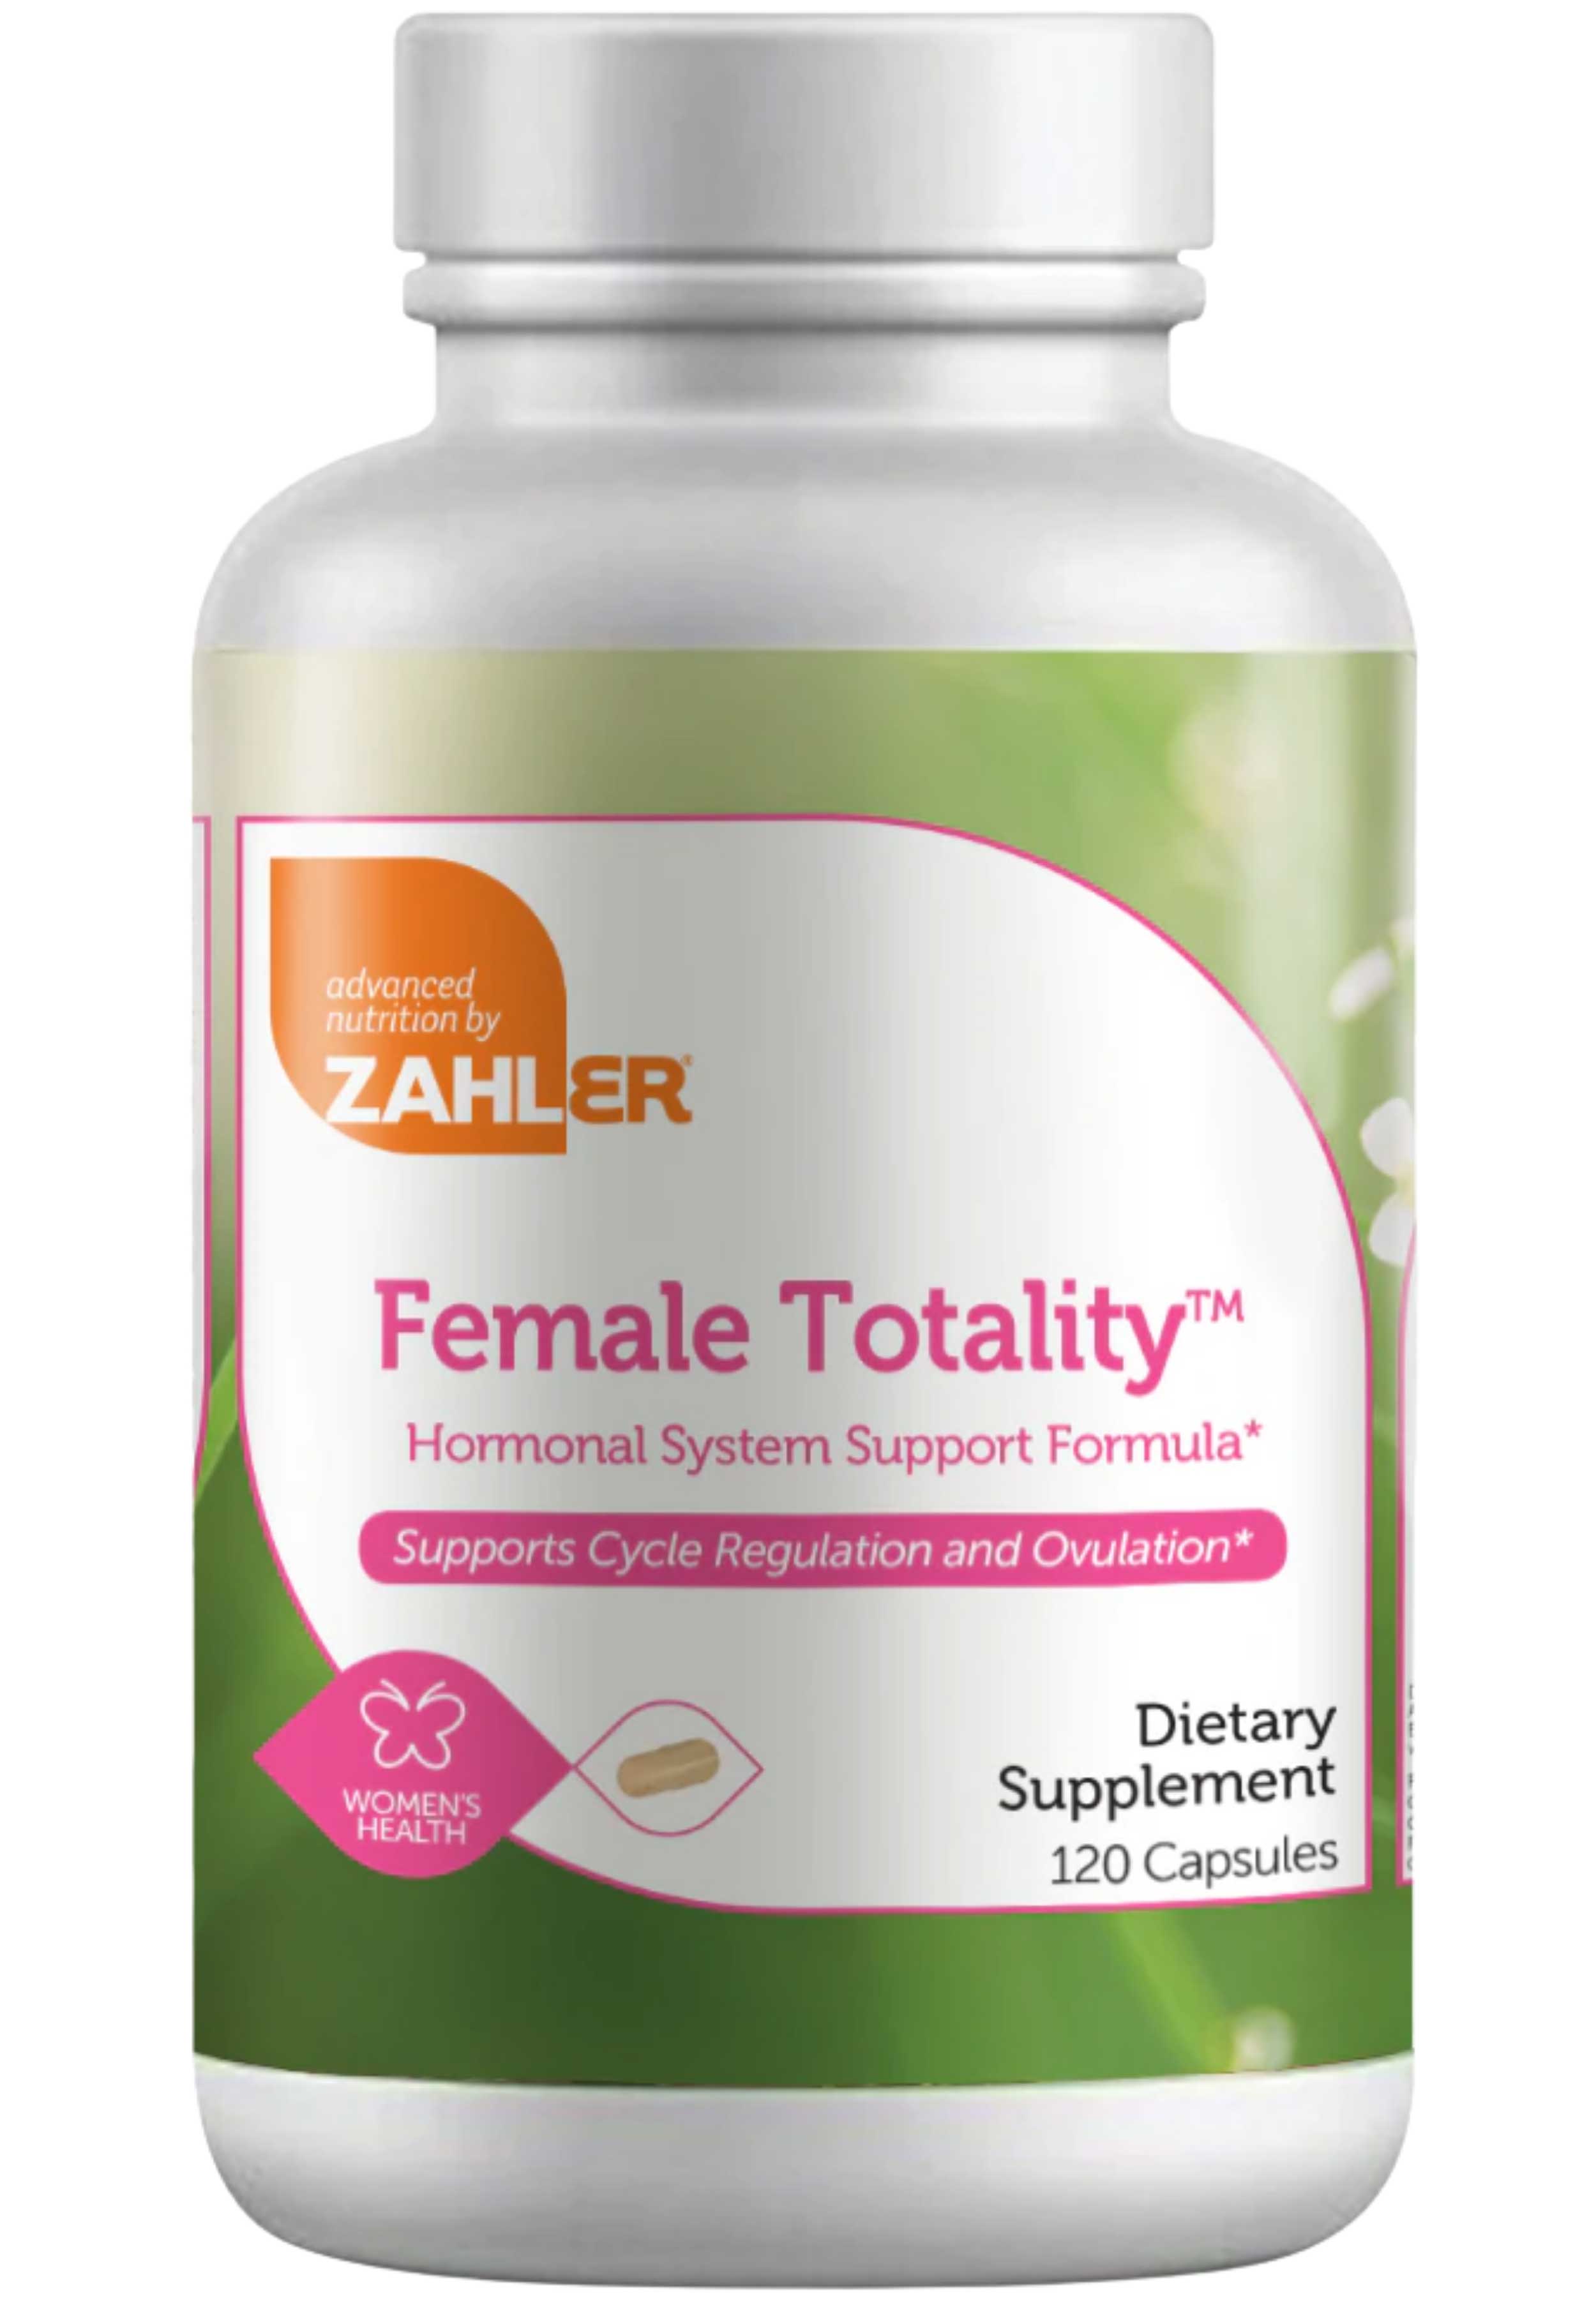 Advanced Nutrition By Zahler Female Totality